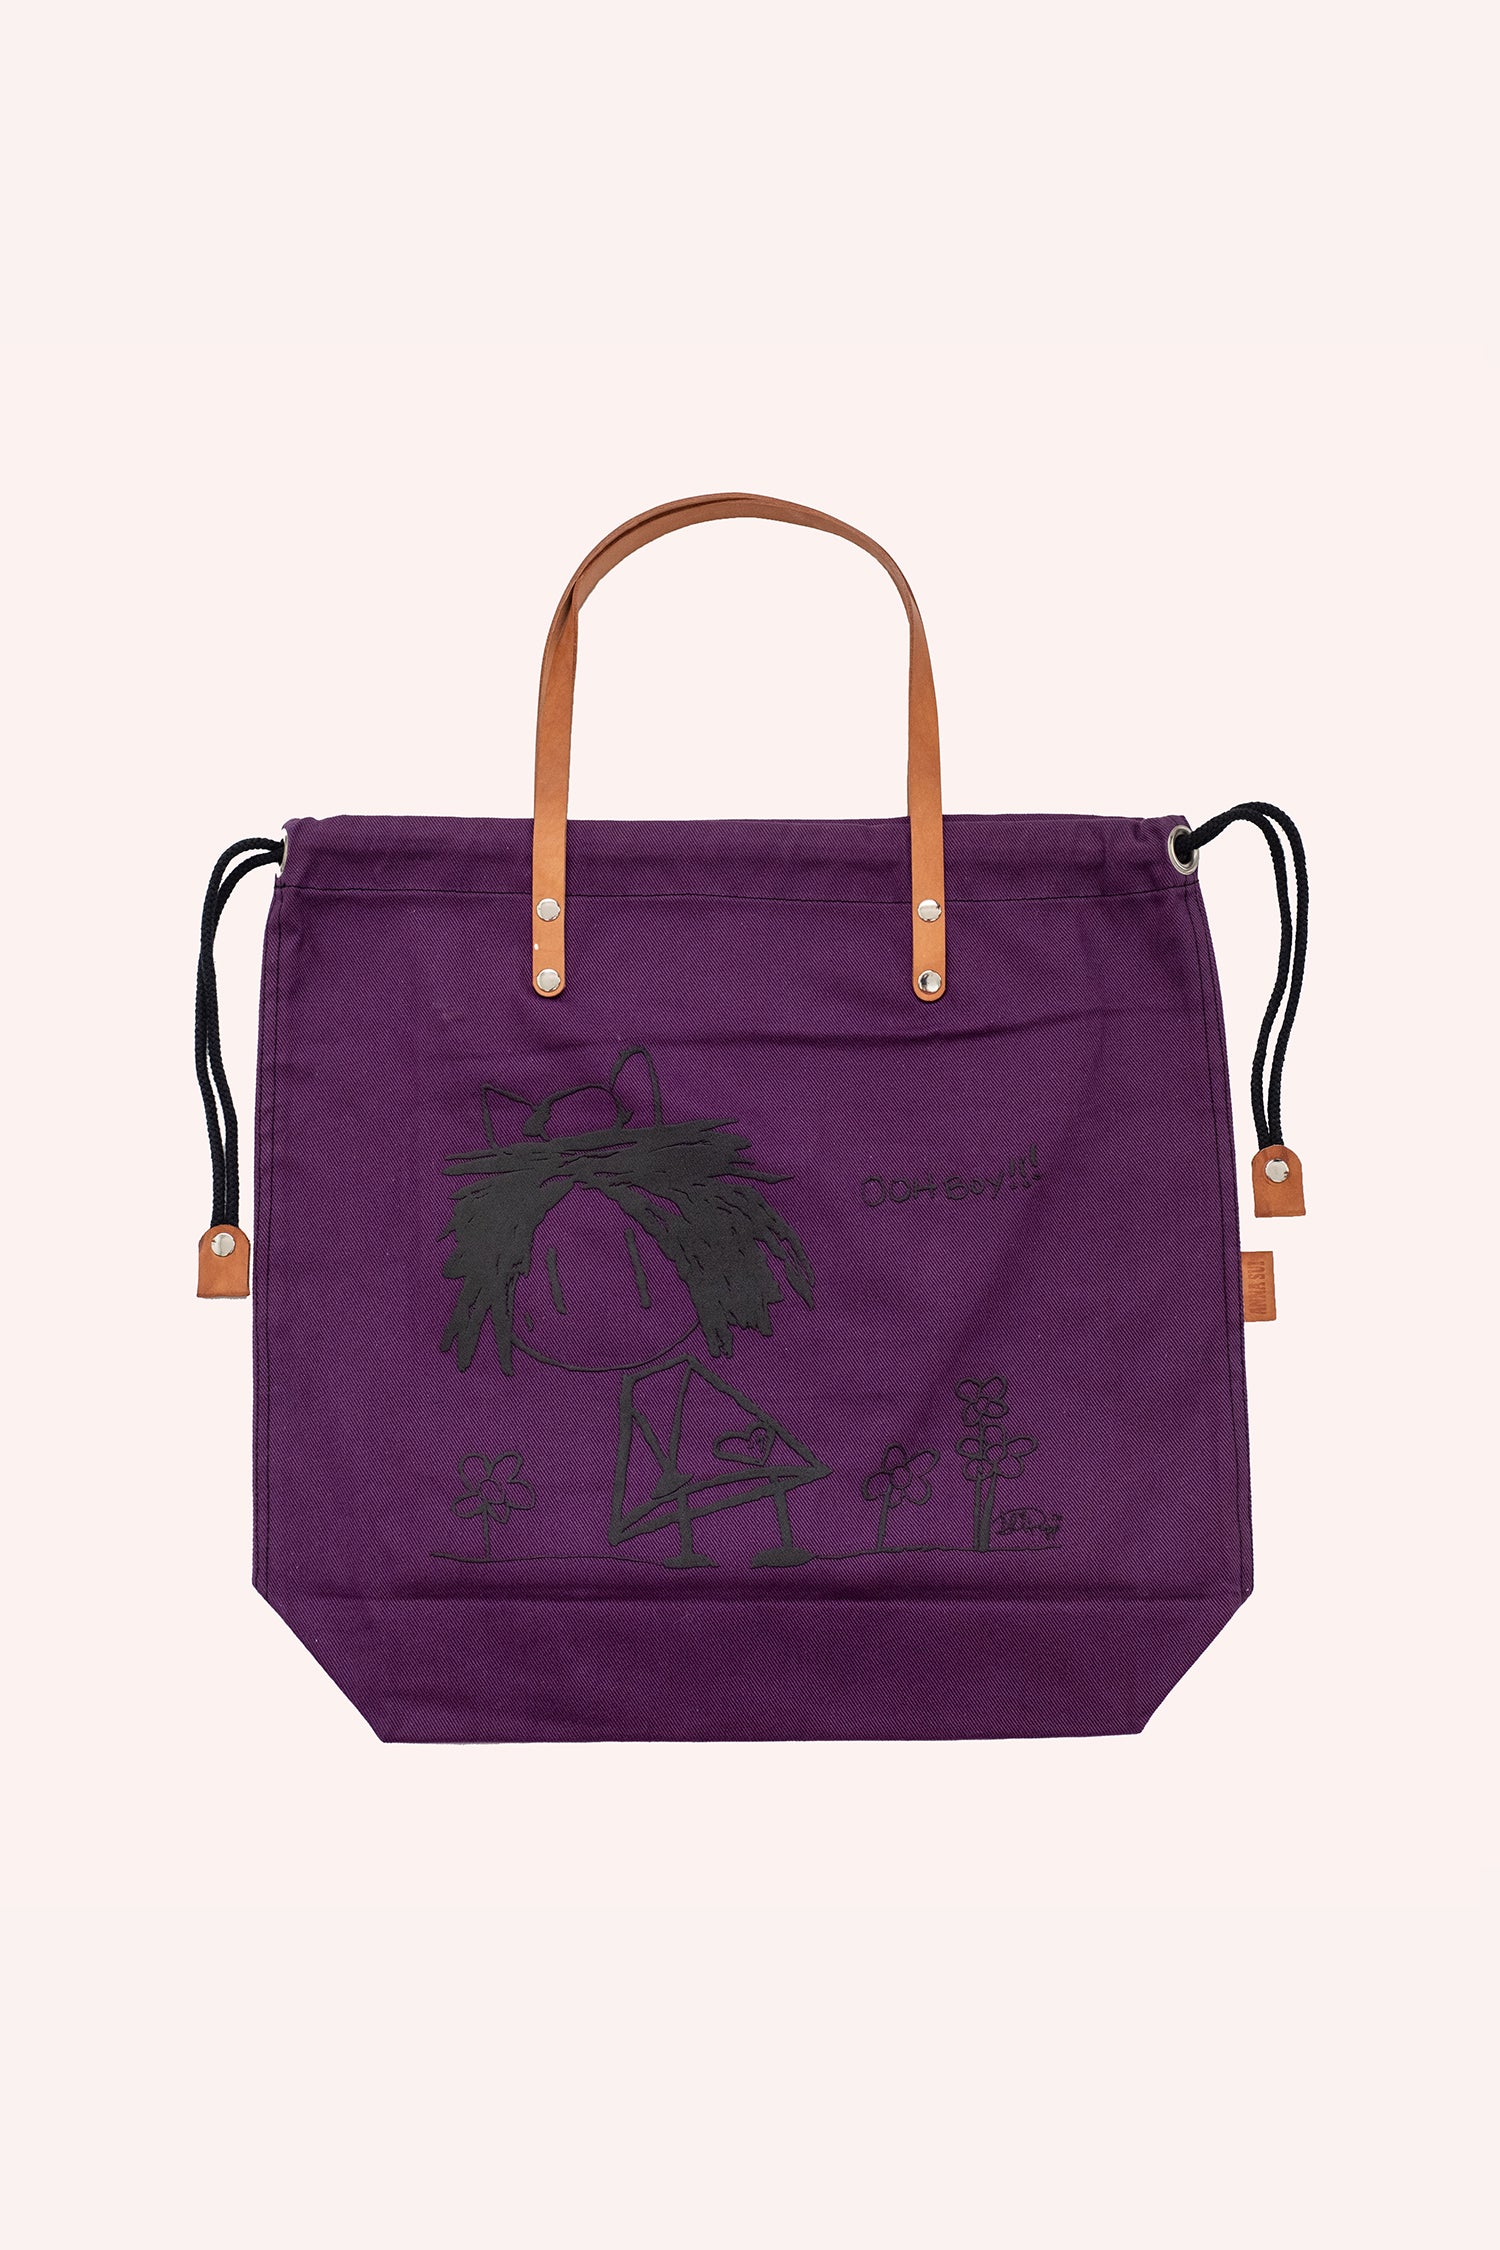 Tote bag, purple blue squared shape, brown handles, black laces to closed, Ali Rapp artwork a grey Happy girl 